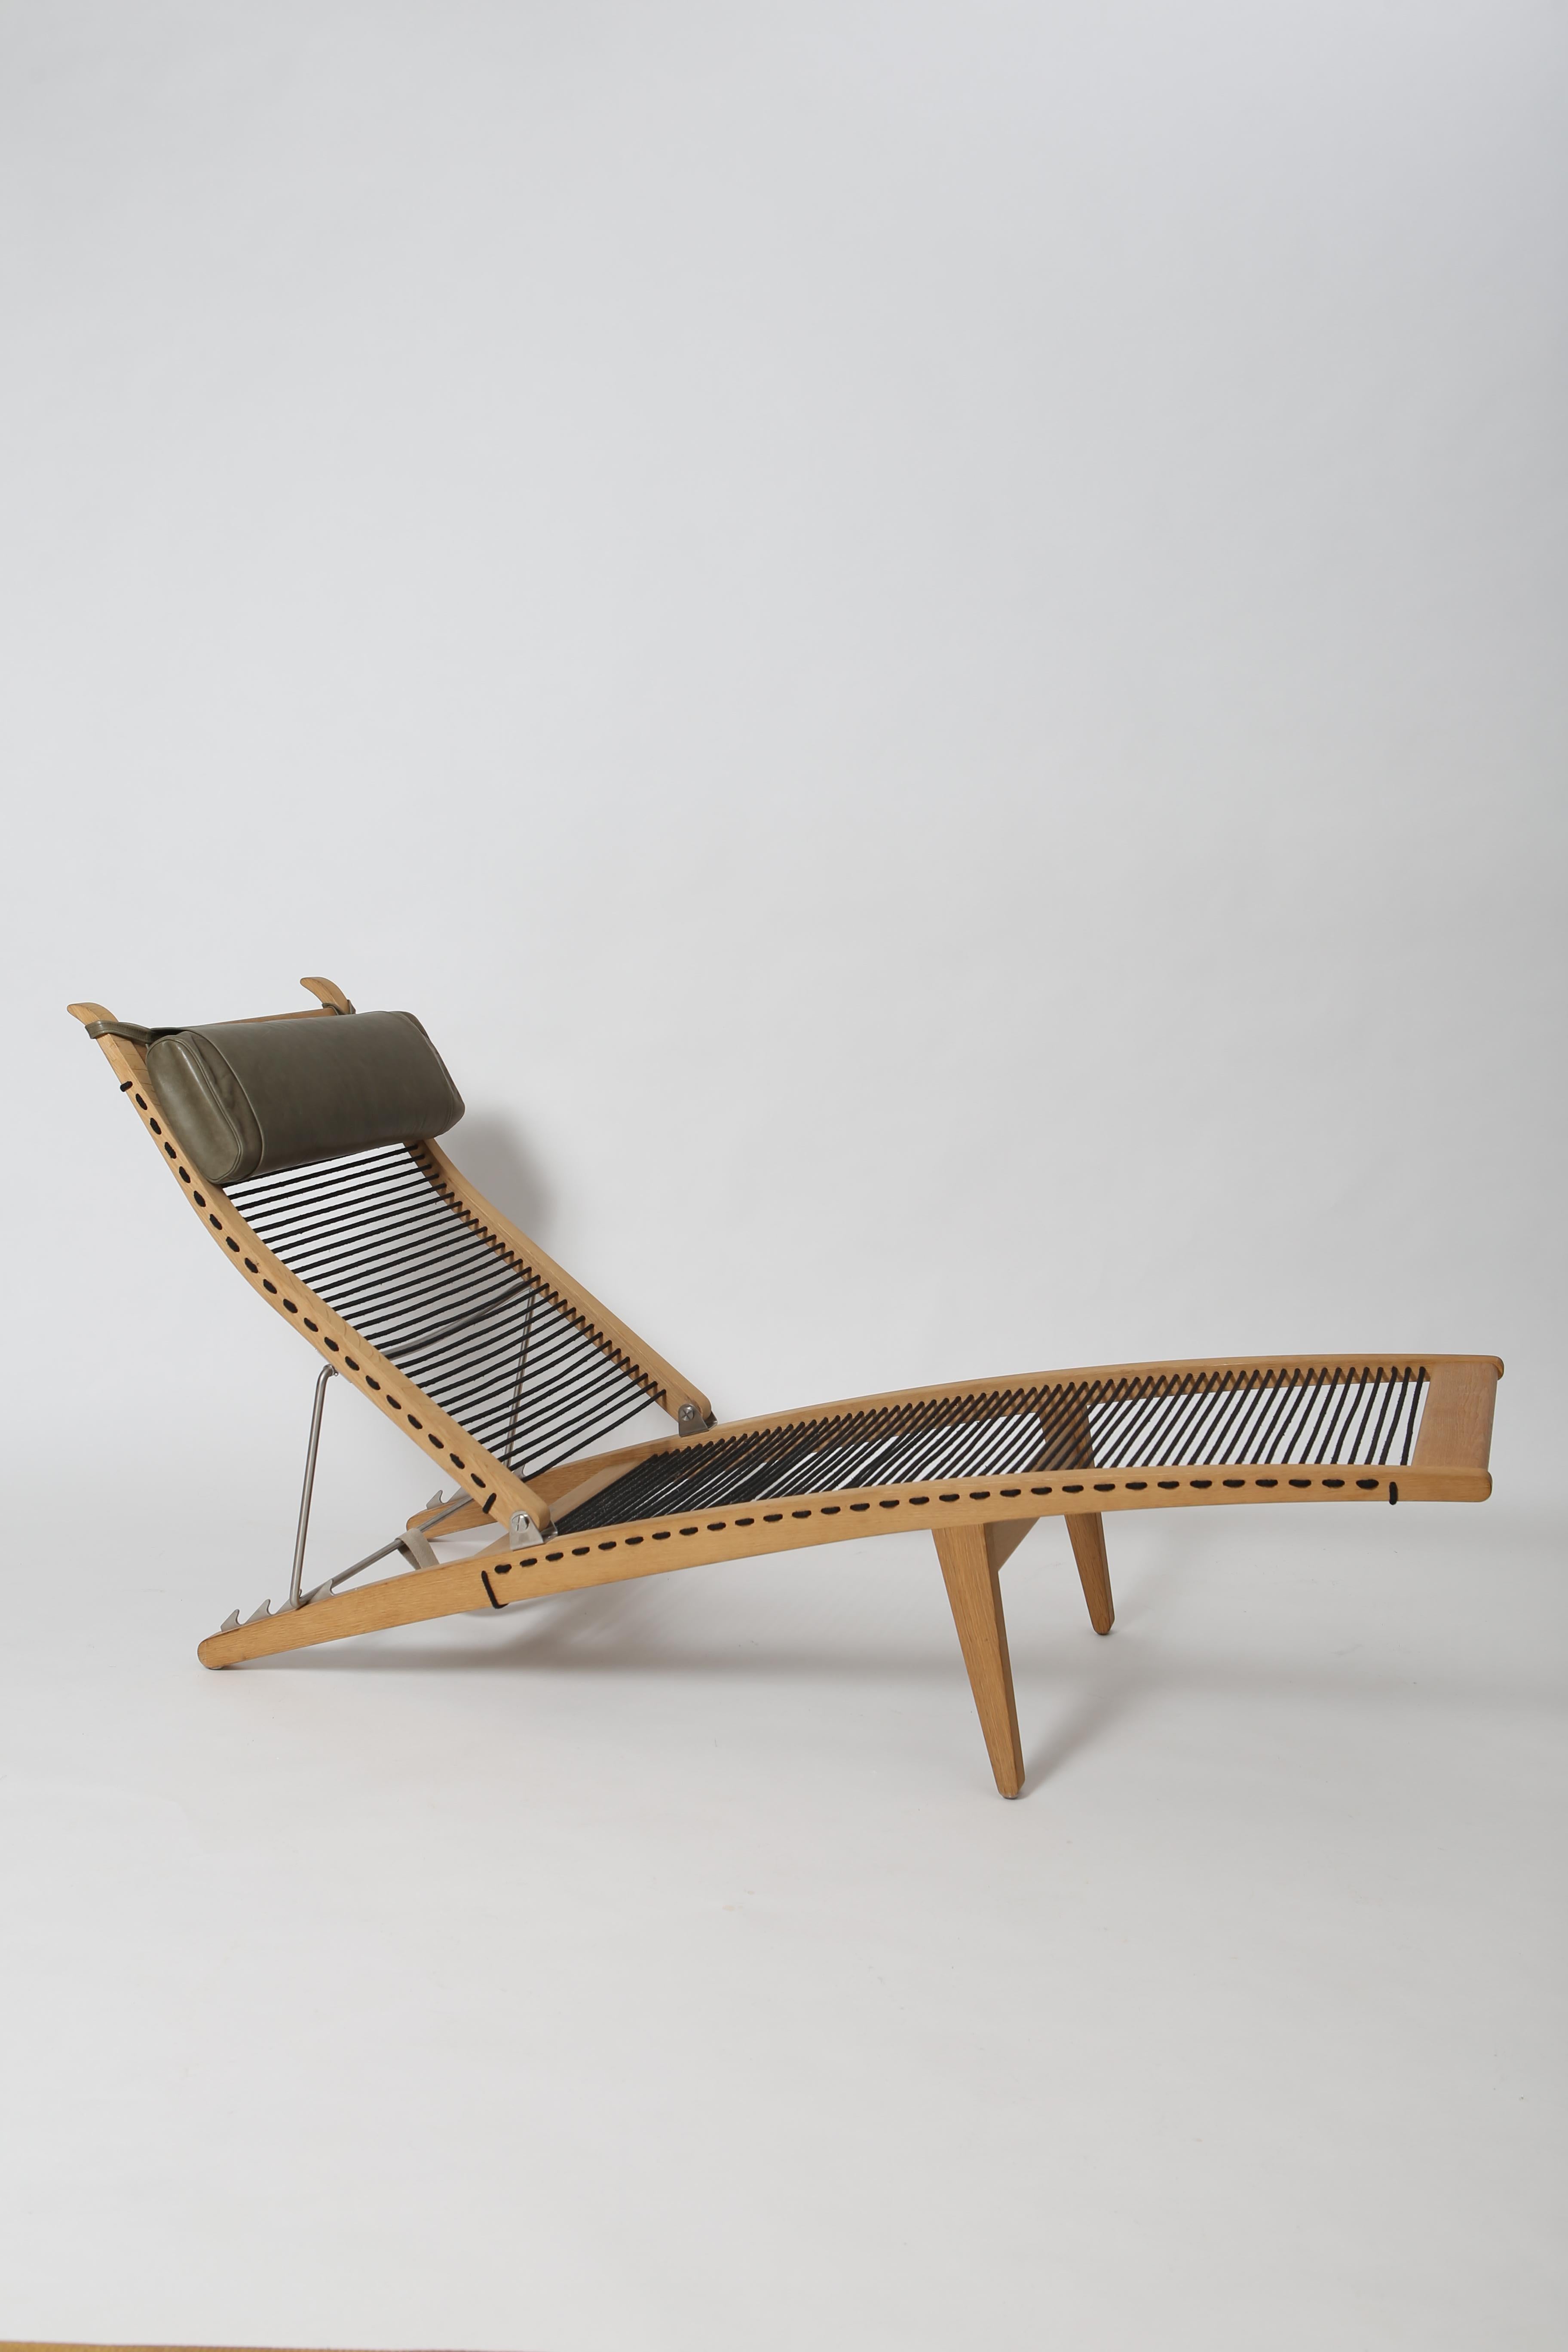 Hand-Crafted Deckchair in Oak by Hans J. Wegner PP 524 For Sale